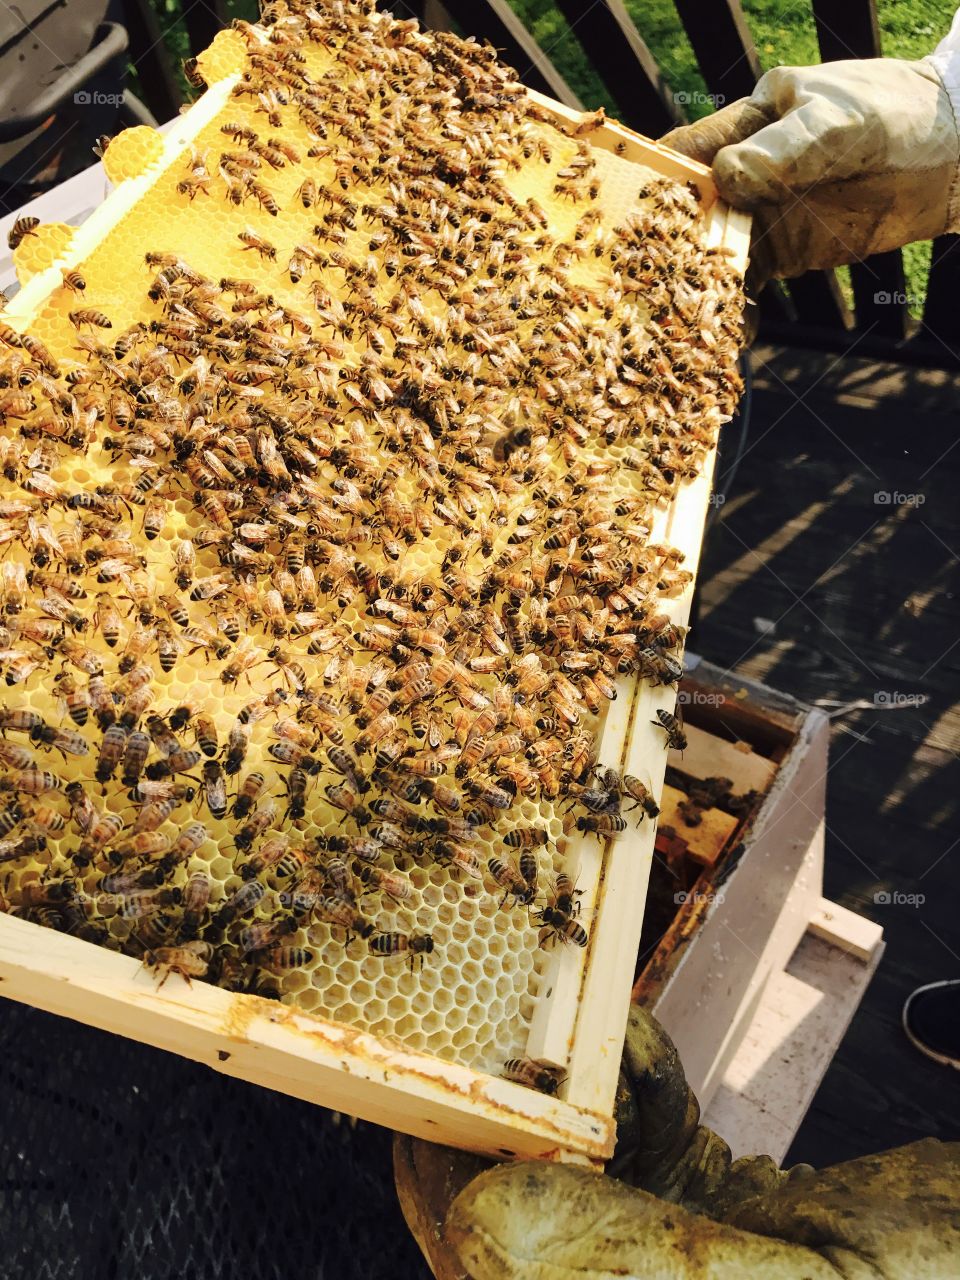 Busy Hive